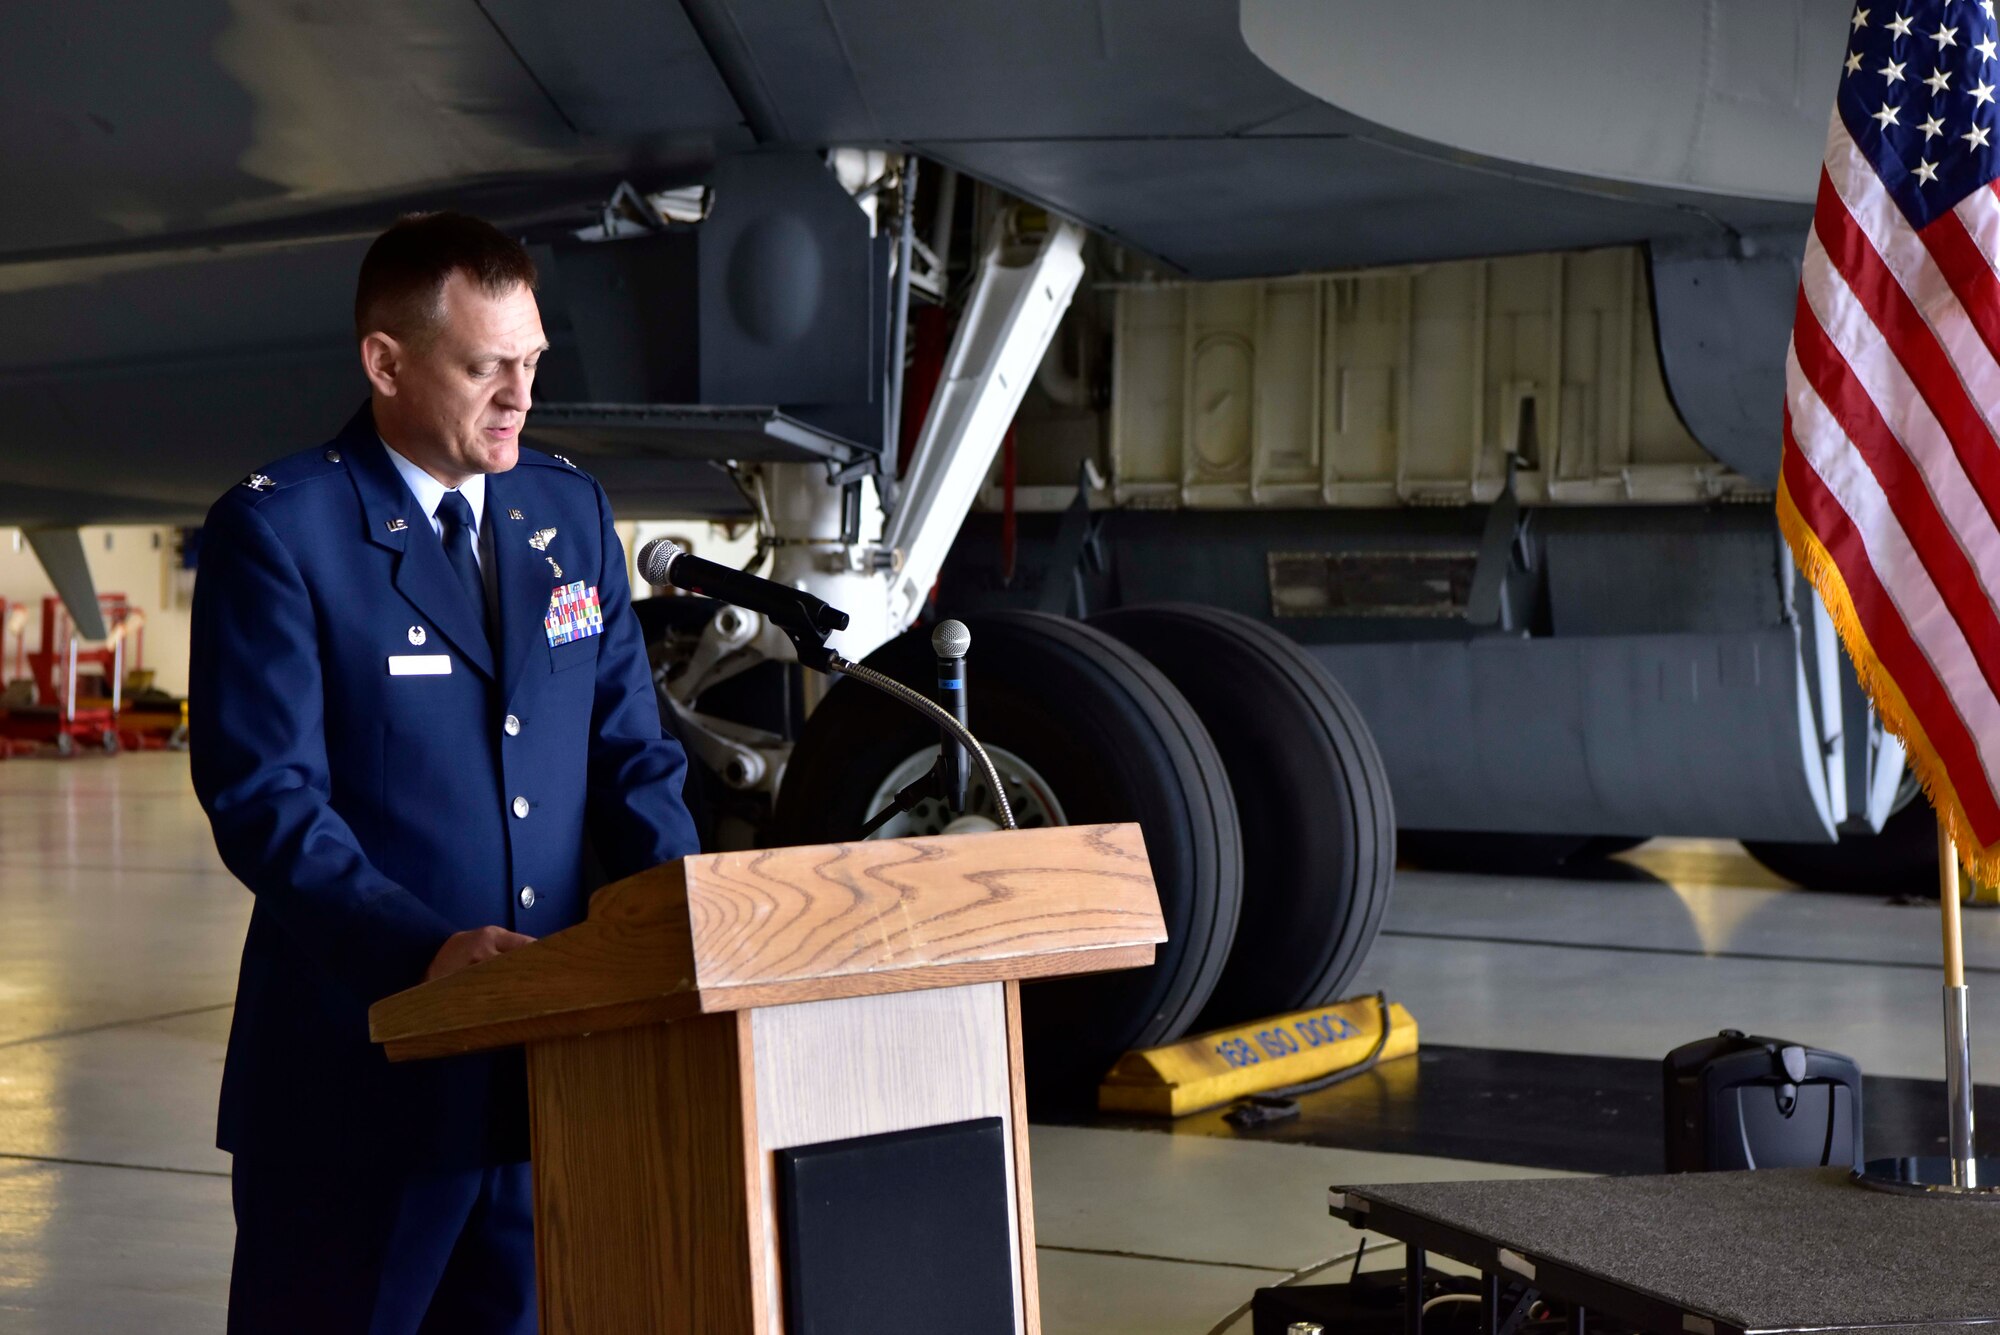 U.S. Air Force Col. William Thoms, Jr., the 54th Medical Group commander, speaks at the 354th Medical Operations Squadron assumption of command ceremony at Eielson Air Force Base, Alaska, July 17, 2020. Lt. Col. Clayton Rabens assumed command of the 354th MDOS after serving as a resident at the U.S. Air Force School of Medicine at Wright-Patterson Air Force Base, Ohio. (U.S. Air Force photo by Senior Airman Beaux Hebert)